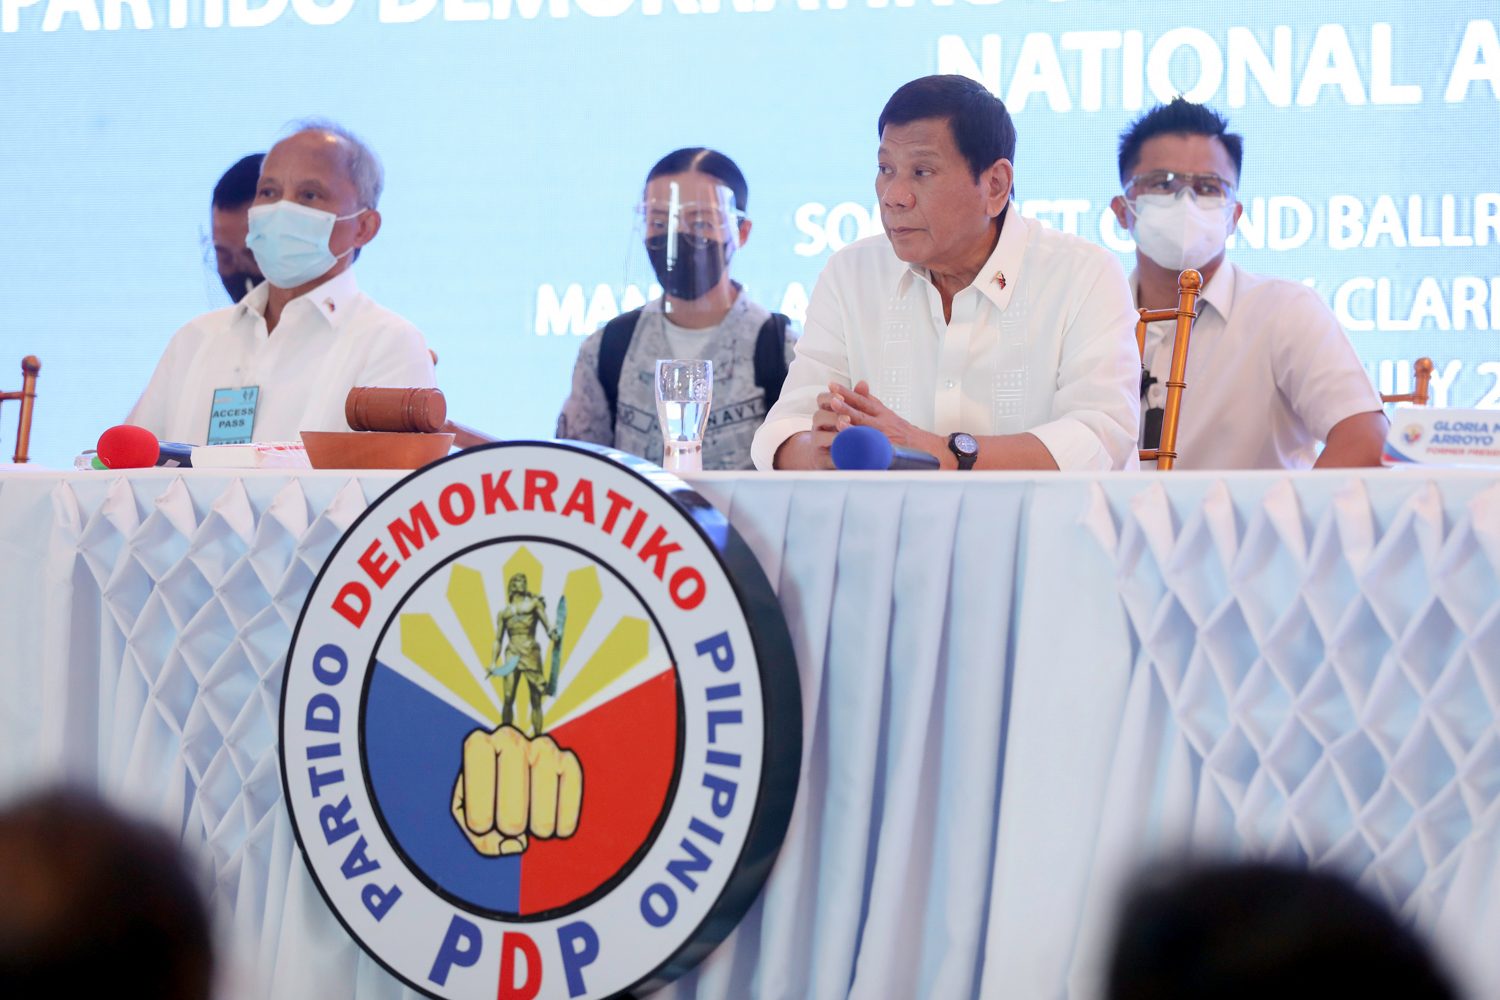 What to expect at PDP-Laban Cusi faction’s hybrid national convention